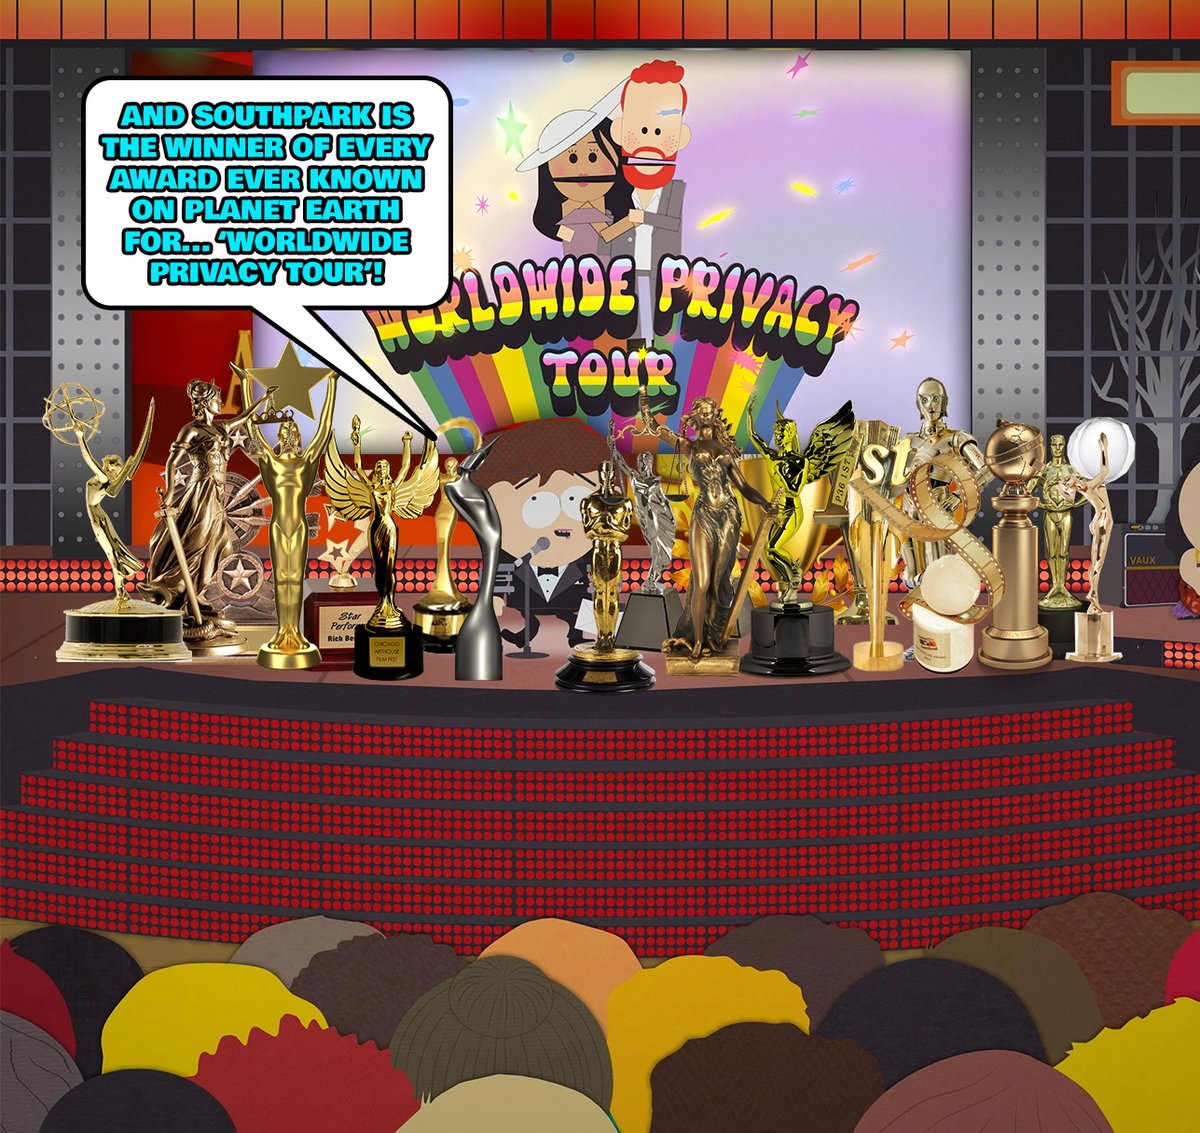 Southparks 'Worldwide Privacy Tour' receiving every award and trophy ever known to humankind on planet Earth!!🤣
#SouthPark #WorldWidePrivacyTour #MeghanMarkleIsAConArtist #SussexFrauds #sussexbabyscam #harrygotscammed #HarryAndMeghanAreFinished #HarryandMeghanAreAJoke #markled